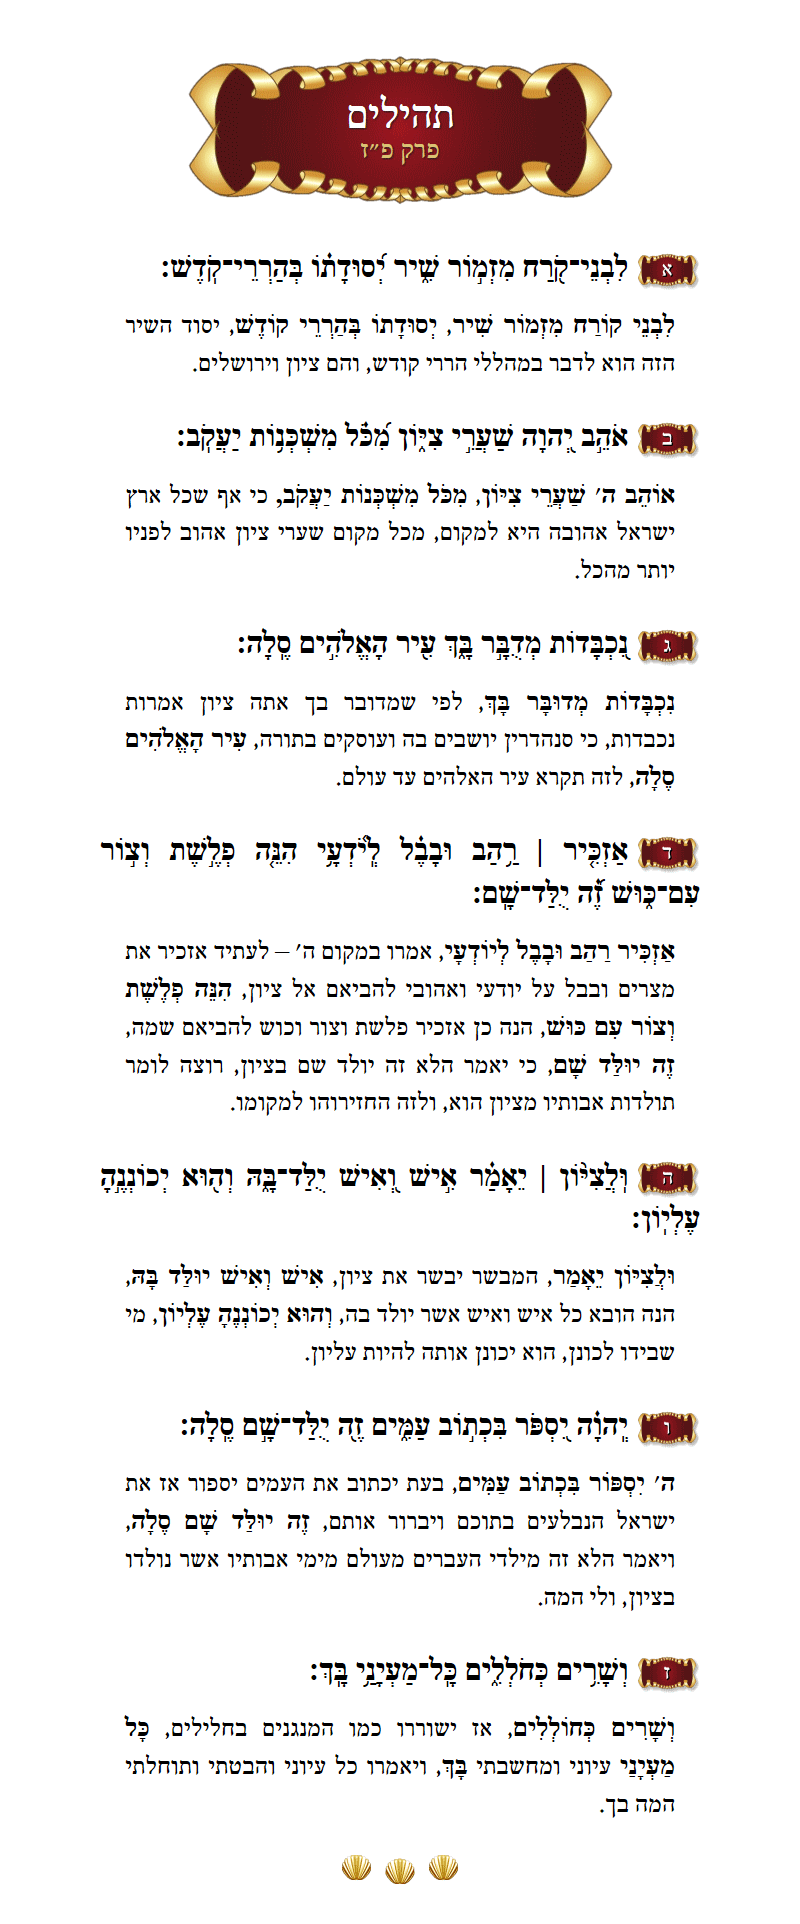 Sefer Tehillim Chapter 078 with commentary